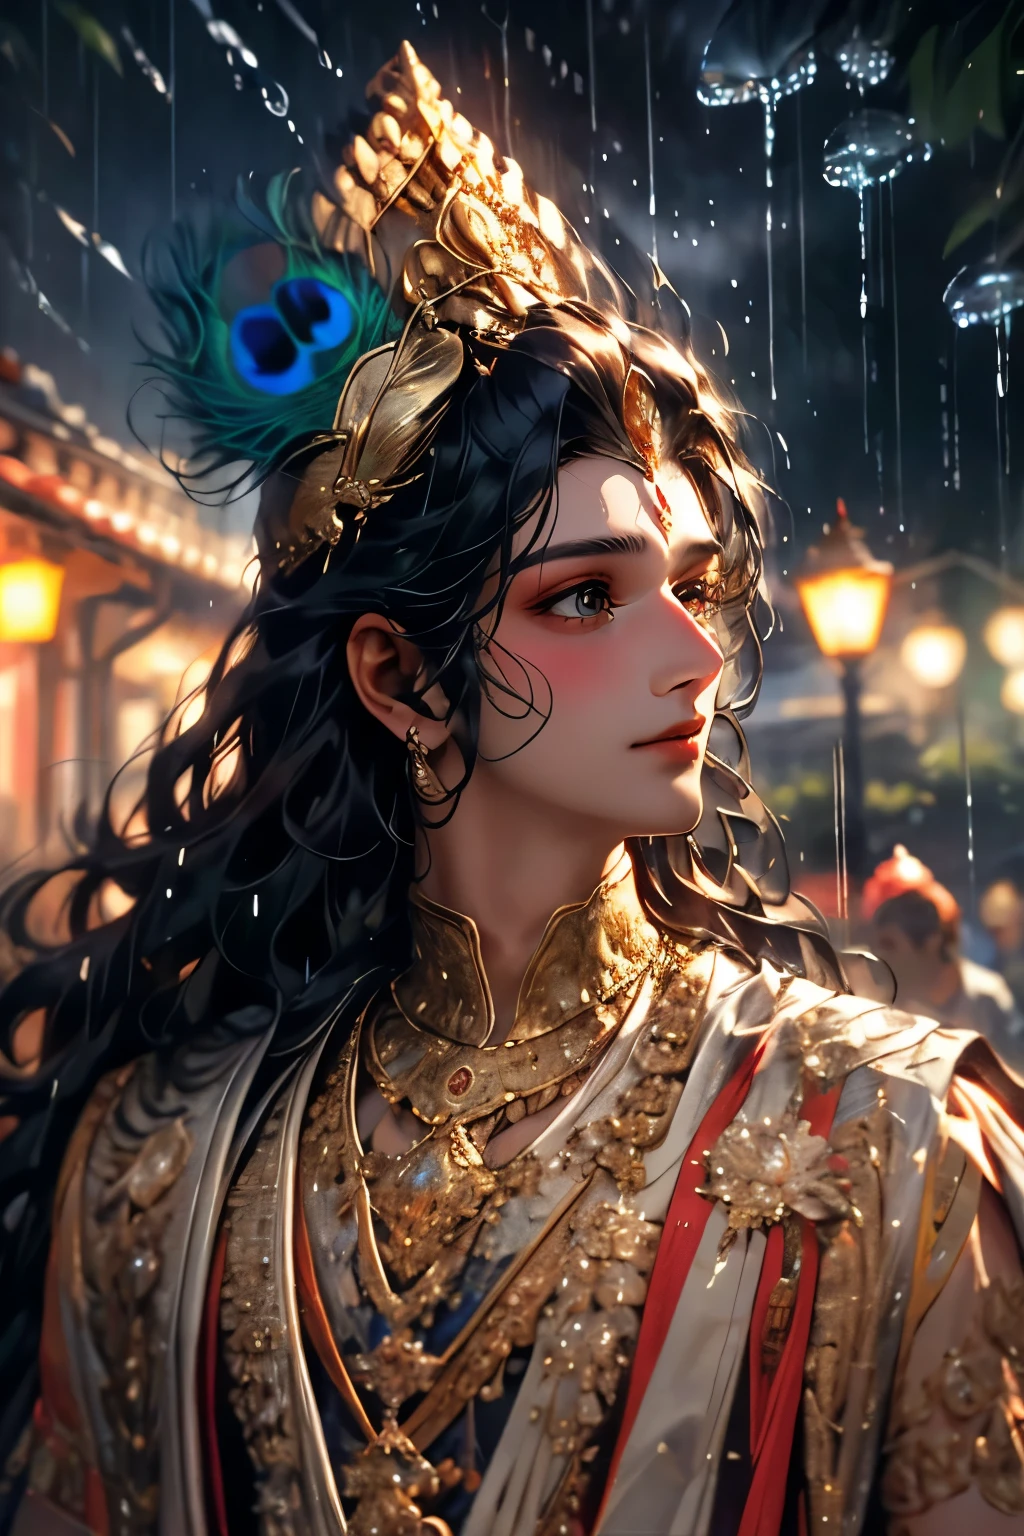 a close up picture of Lord Krishna's face looking towards the sky, as he looks up the (rain drops: 1.3) fall on his face, a very beautiful man, long hair, black hair, wavy hair, peacock feathers, (elegant make up: 1.3) wet hair, beautiful eyes opened,looking at the viwer, he wears an elegant, intricate dress, there is a sense of joy on his face, a royal street at night. cloudy night, black horns, breathtaking photo